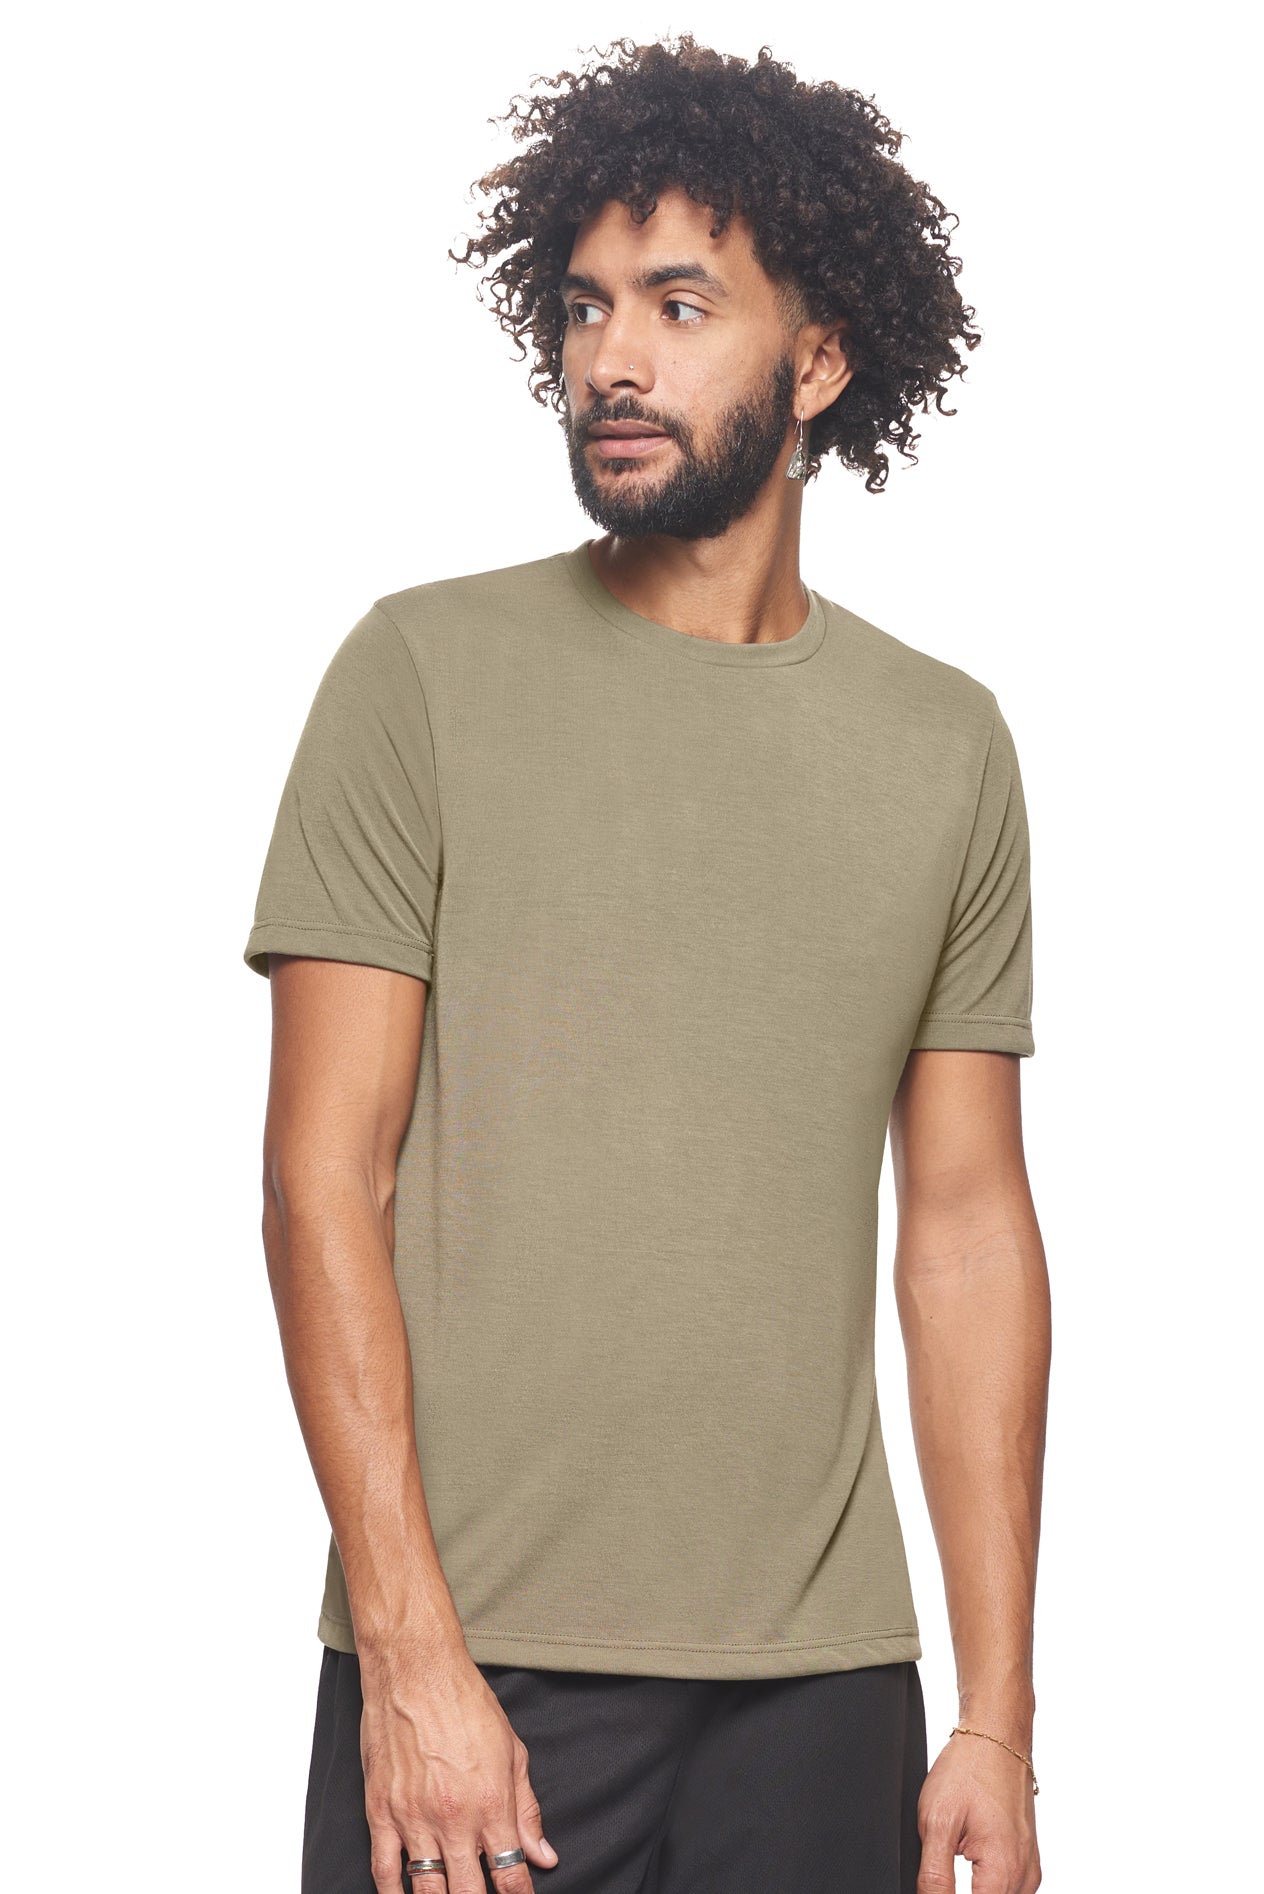 Expert Brand Retail Super Soft Eco-Friendly Performance Apparel Fashion Sportswear Men's Crewneck T-Shirt Made in USA olive green#color_olive